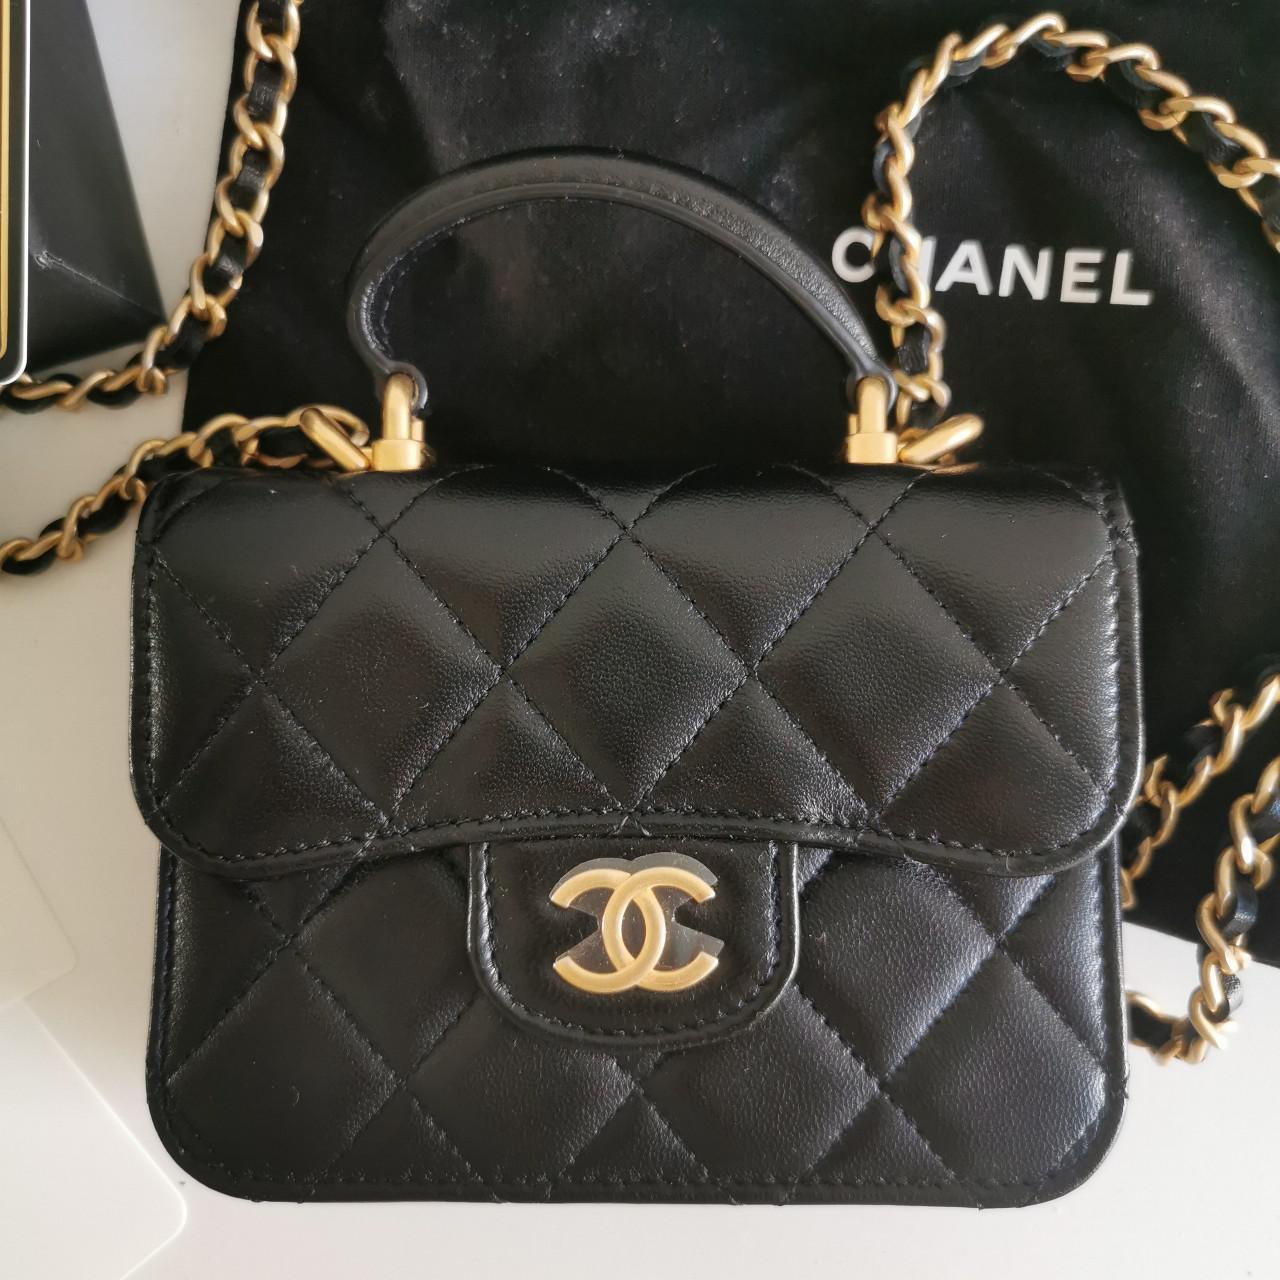 Chanel Women's Black and Gold Bag (2)